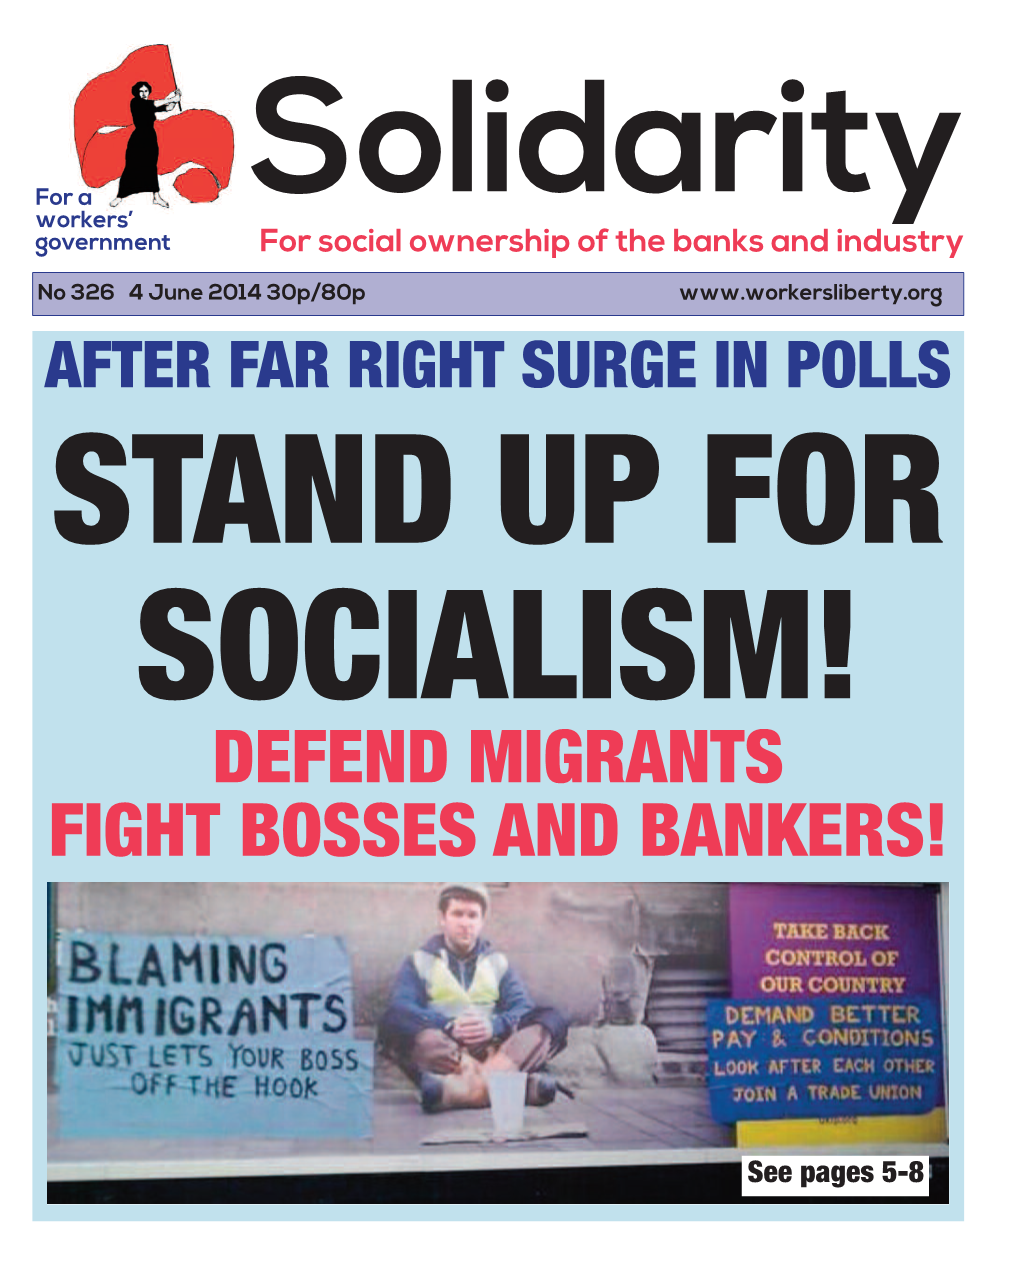 Defend Migrants Fight Bosses and Bankers!